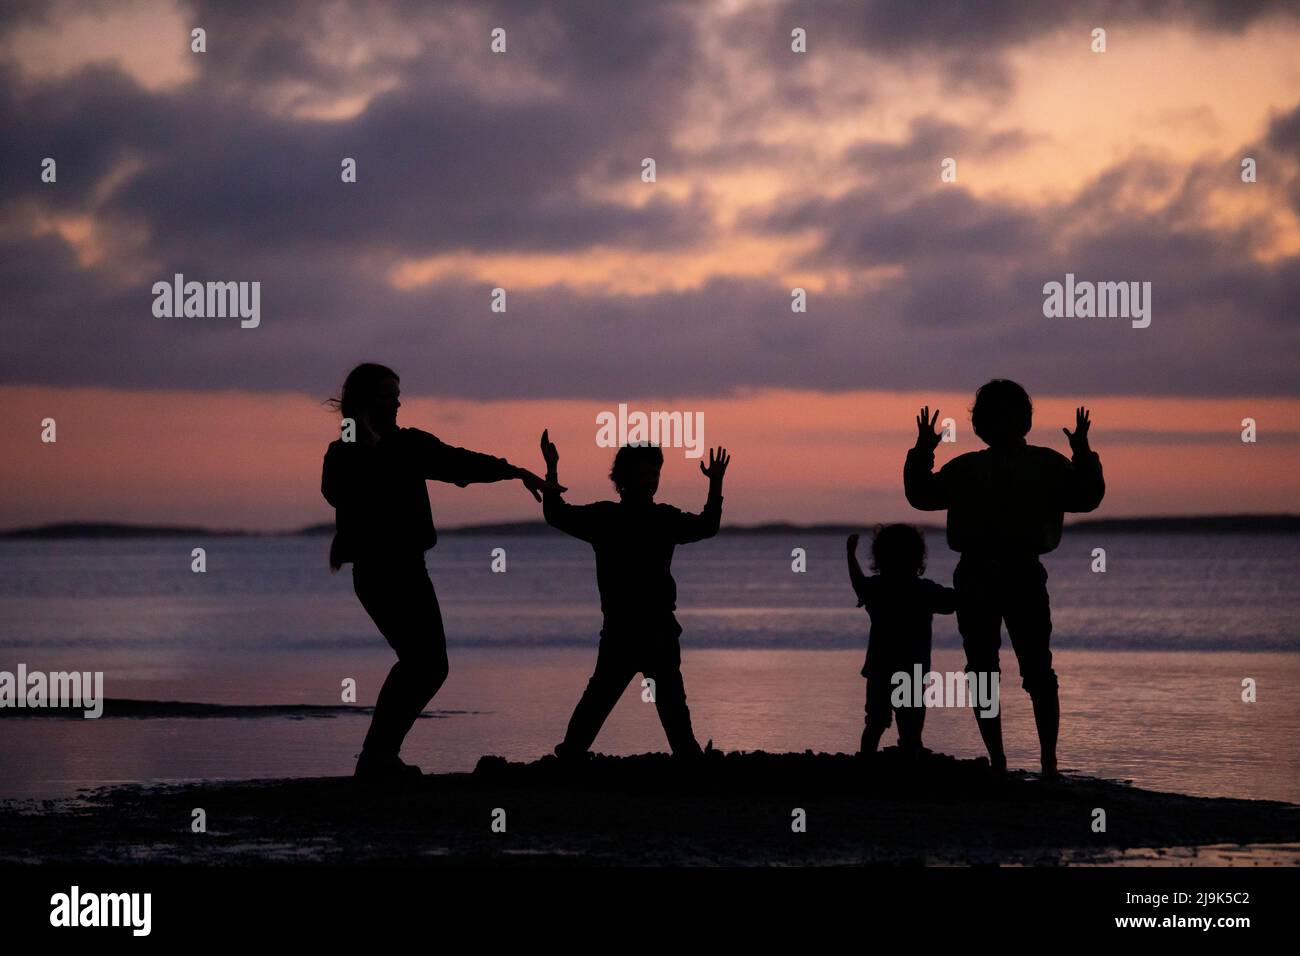 Silhouetted family dancing, gesturing on ocean beach at sunset Stock Photo